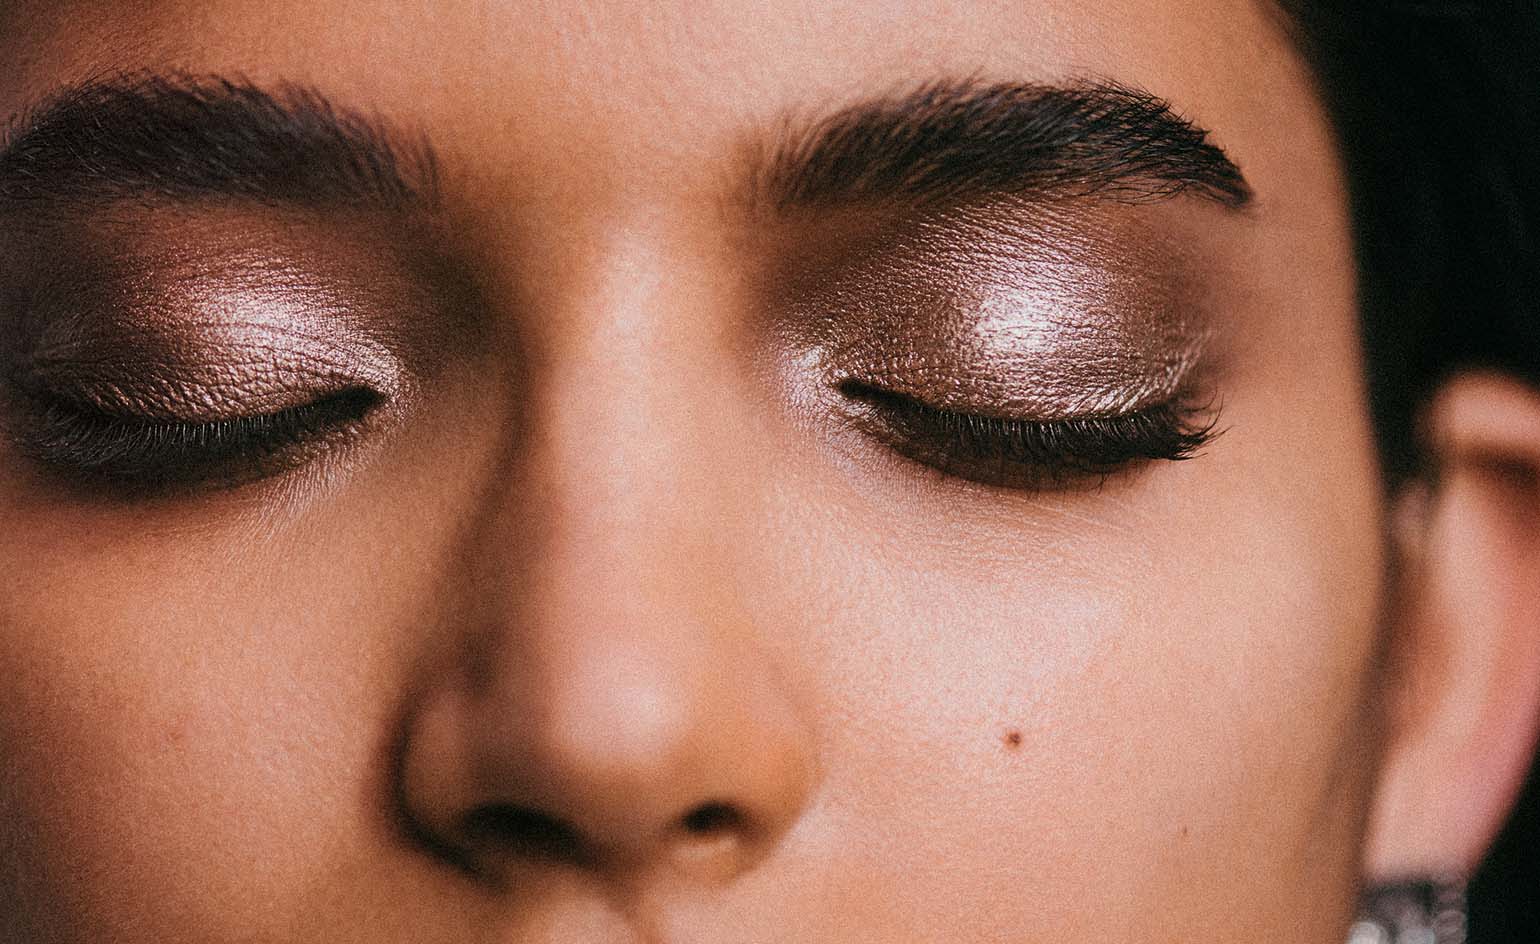 Chanel make-up: How to use the new Chanel Tweed eyeshadow | Wallpaper